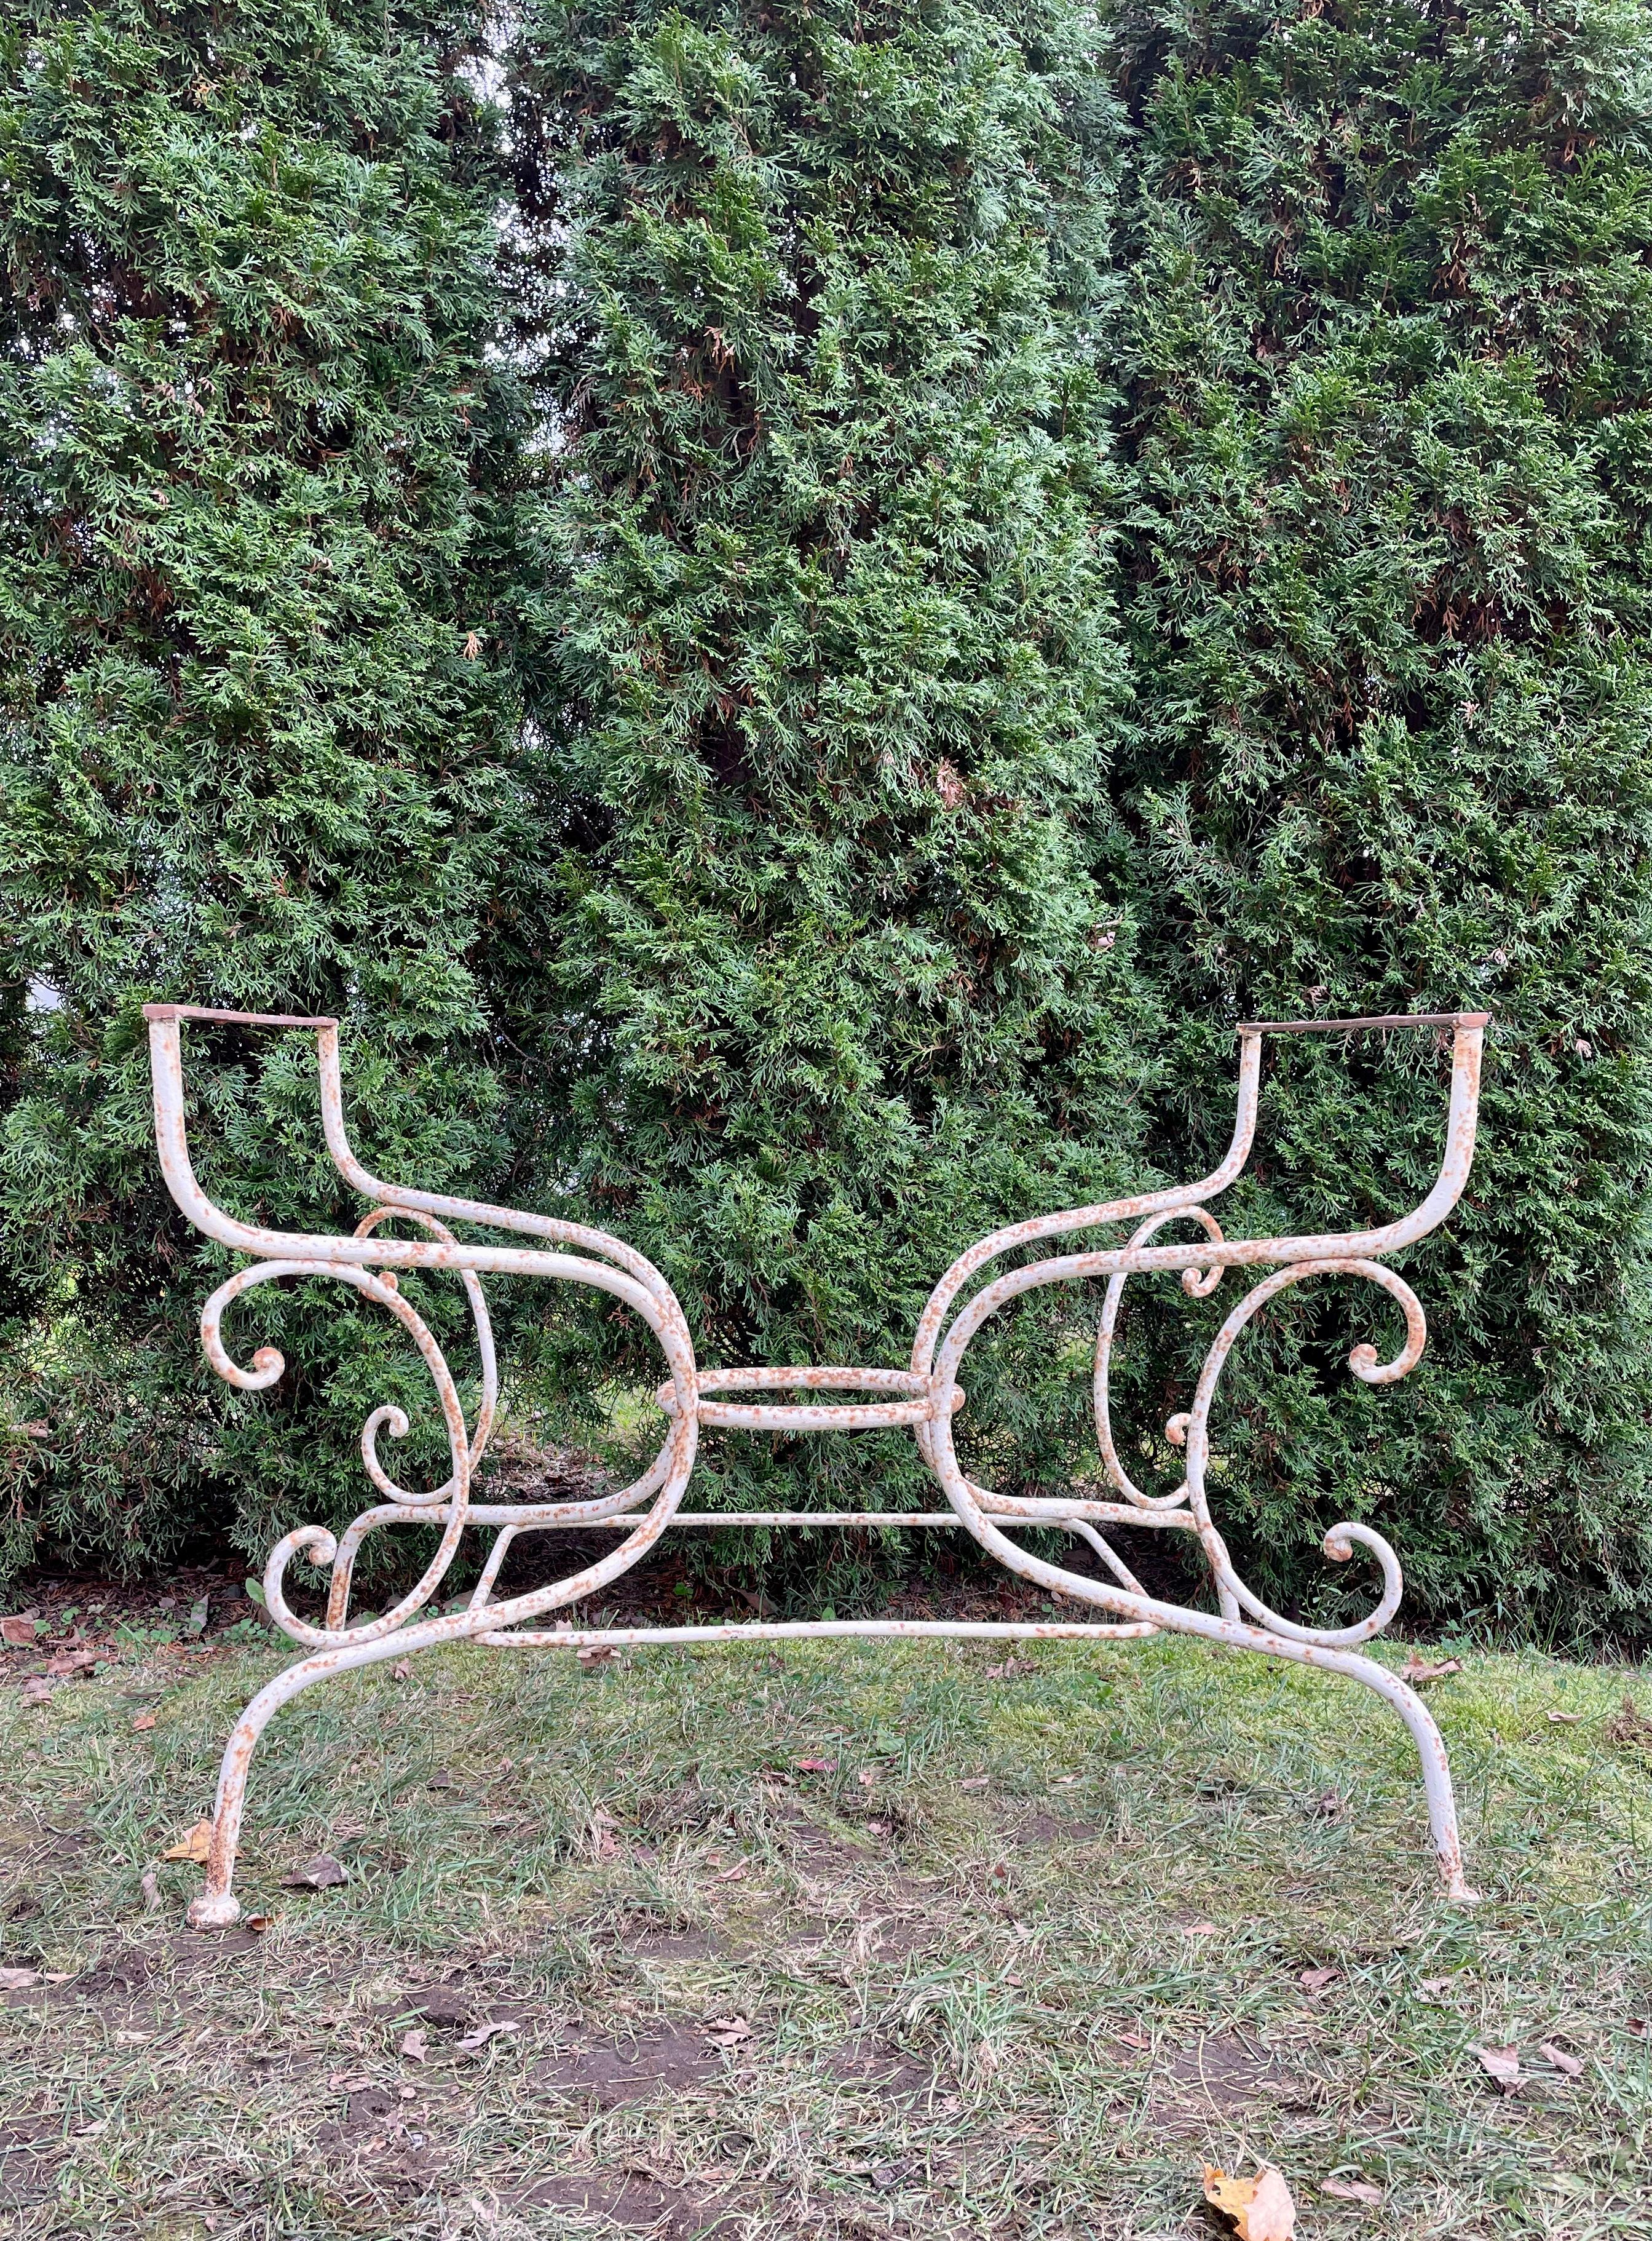 We love French garden tables, especially ones with such sinuous design and presence. Dating to the late 19th C, this one would make a great addition to your terrace, garden, or wine cave to display your wine selections for that special meal or as a